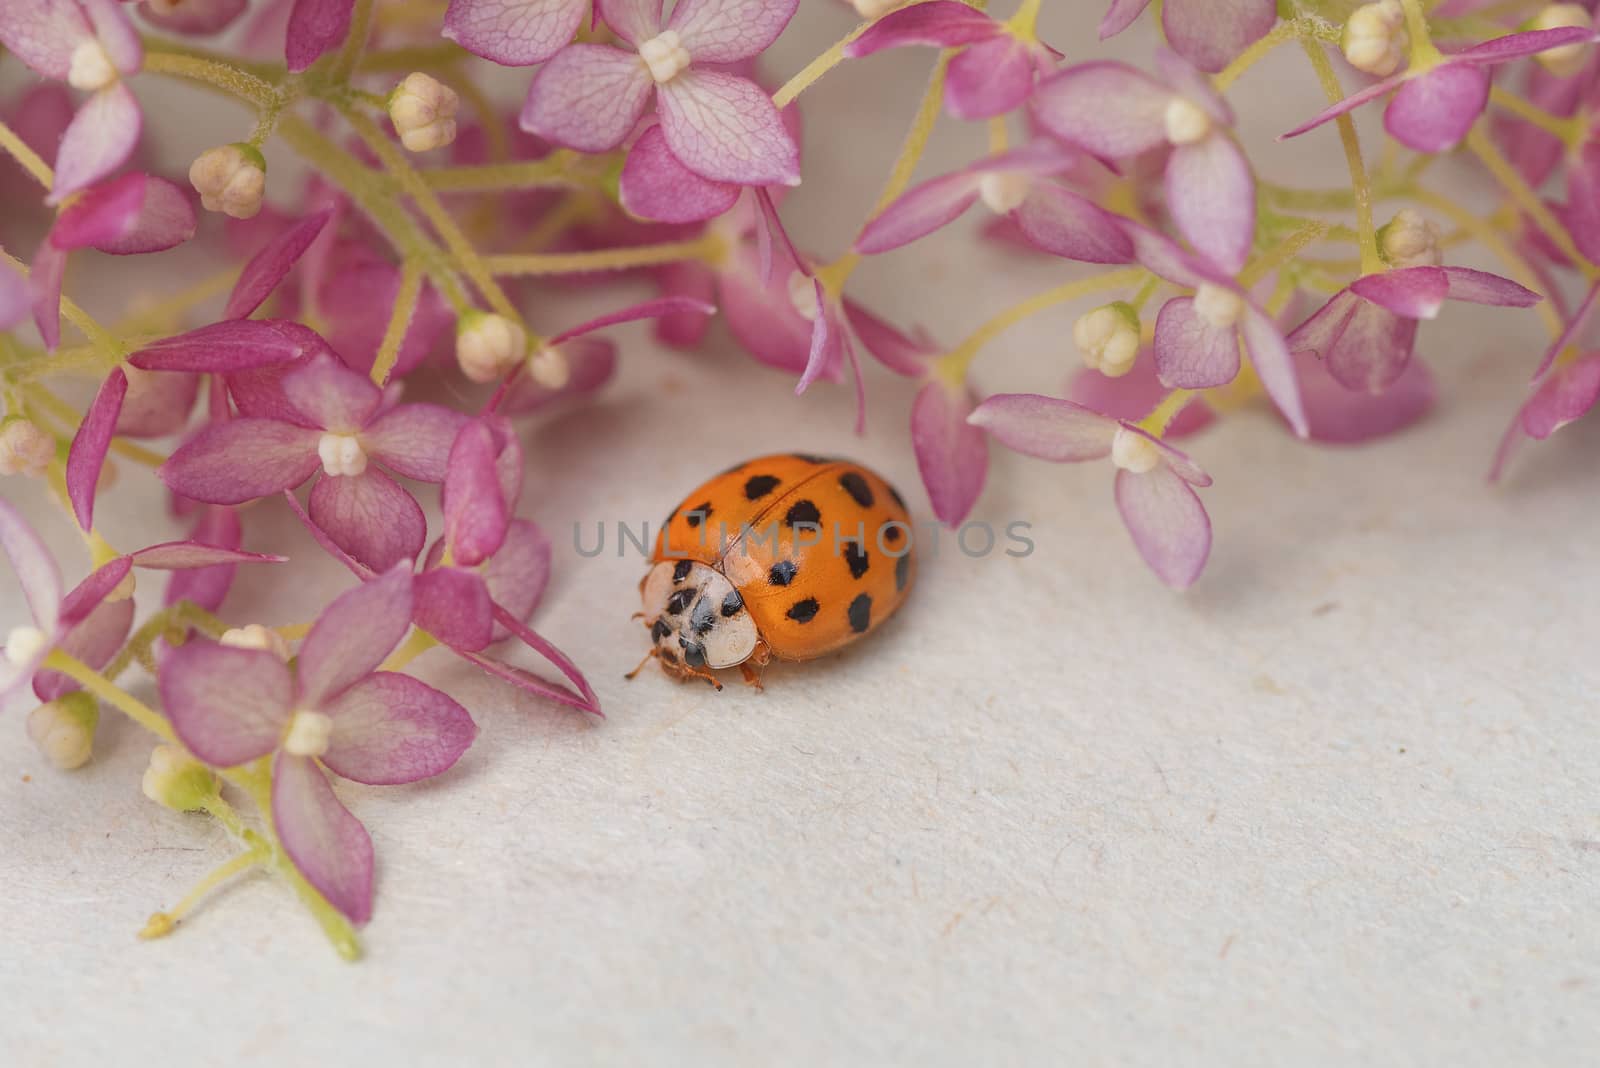 ladybug sits on a flower . Insects, ladybug close-up. Soft and selective focus.